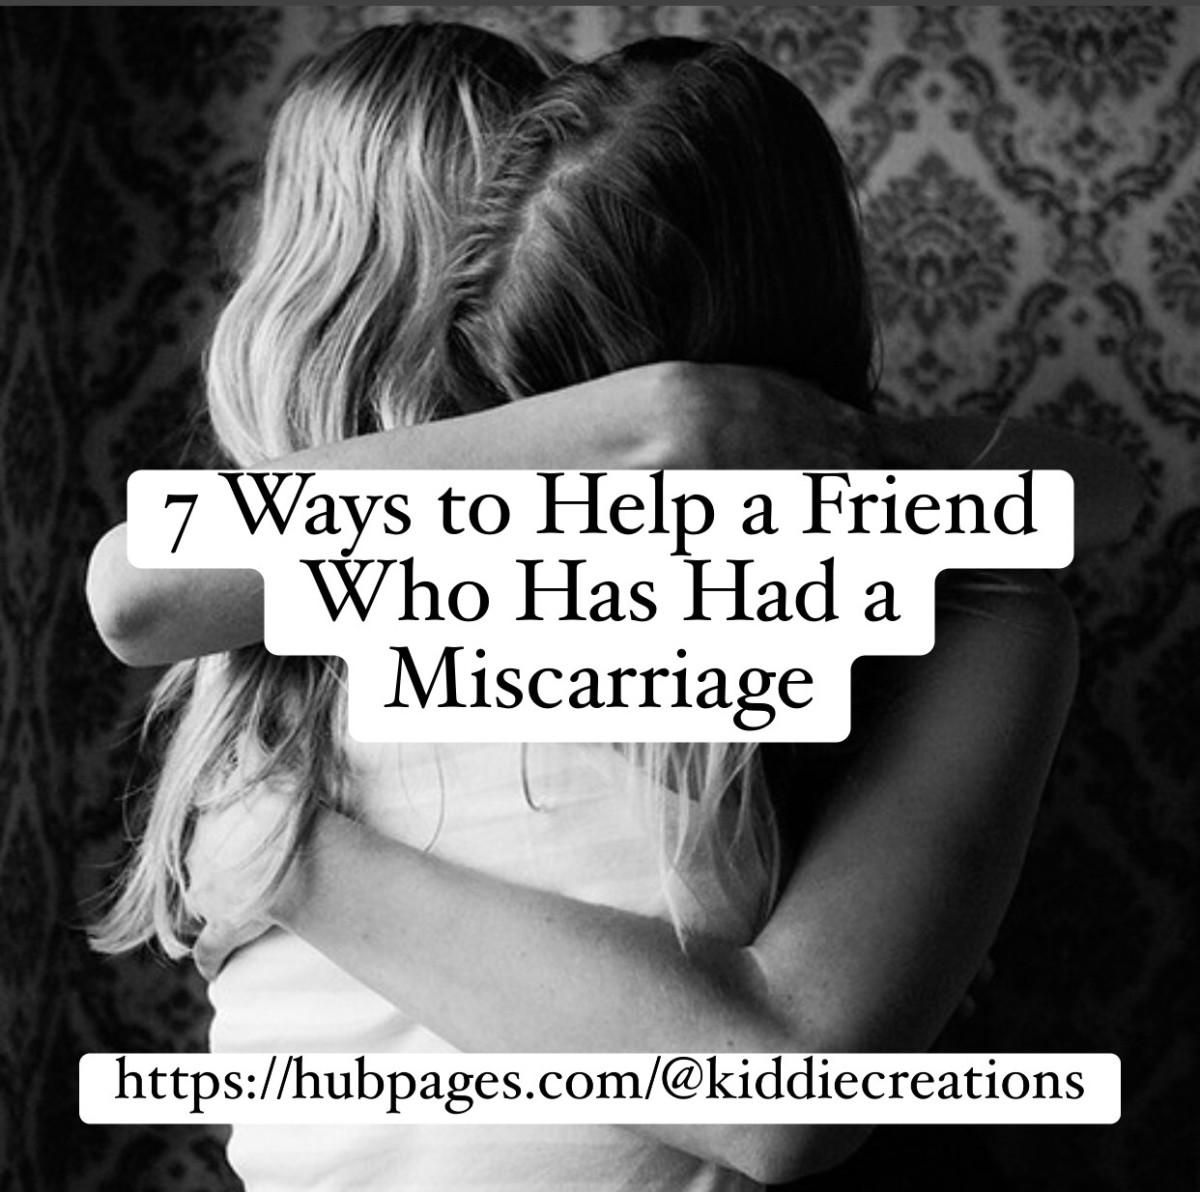 7 Ways to Help a Friend Who Has Had a Miscarriage